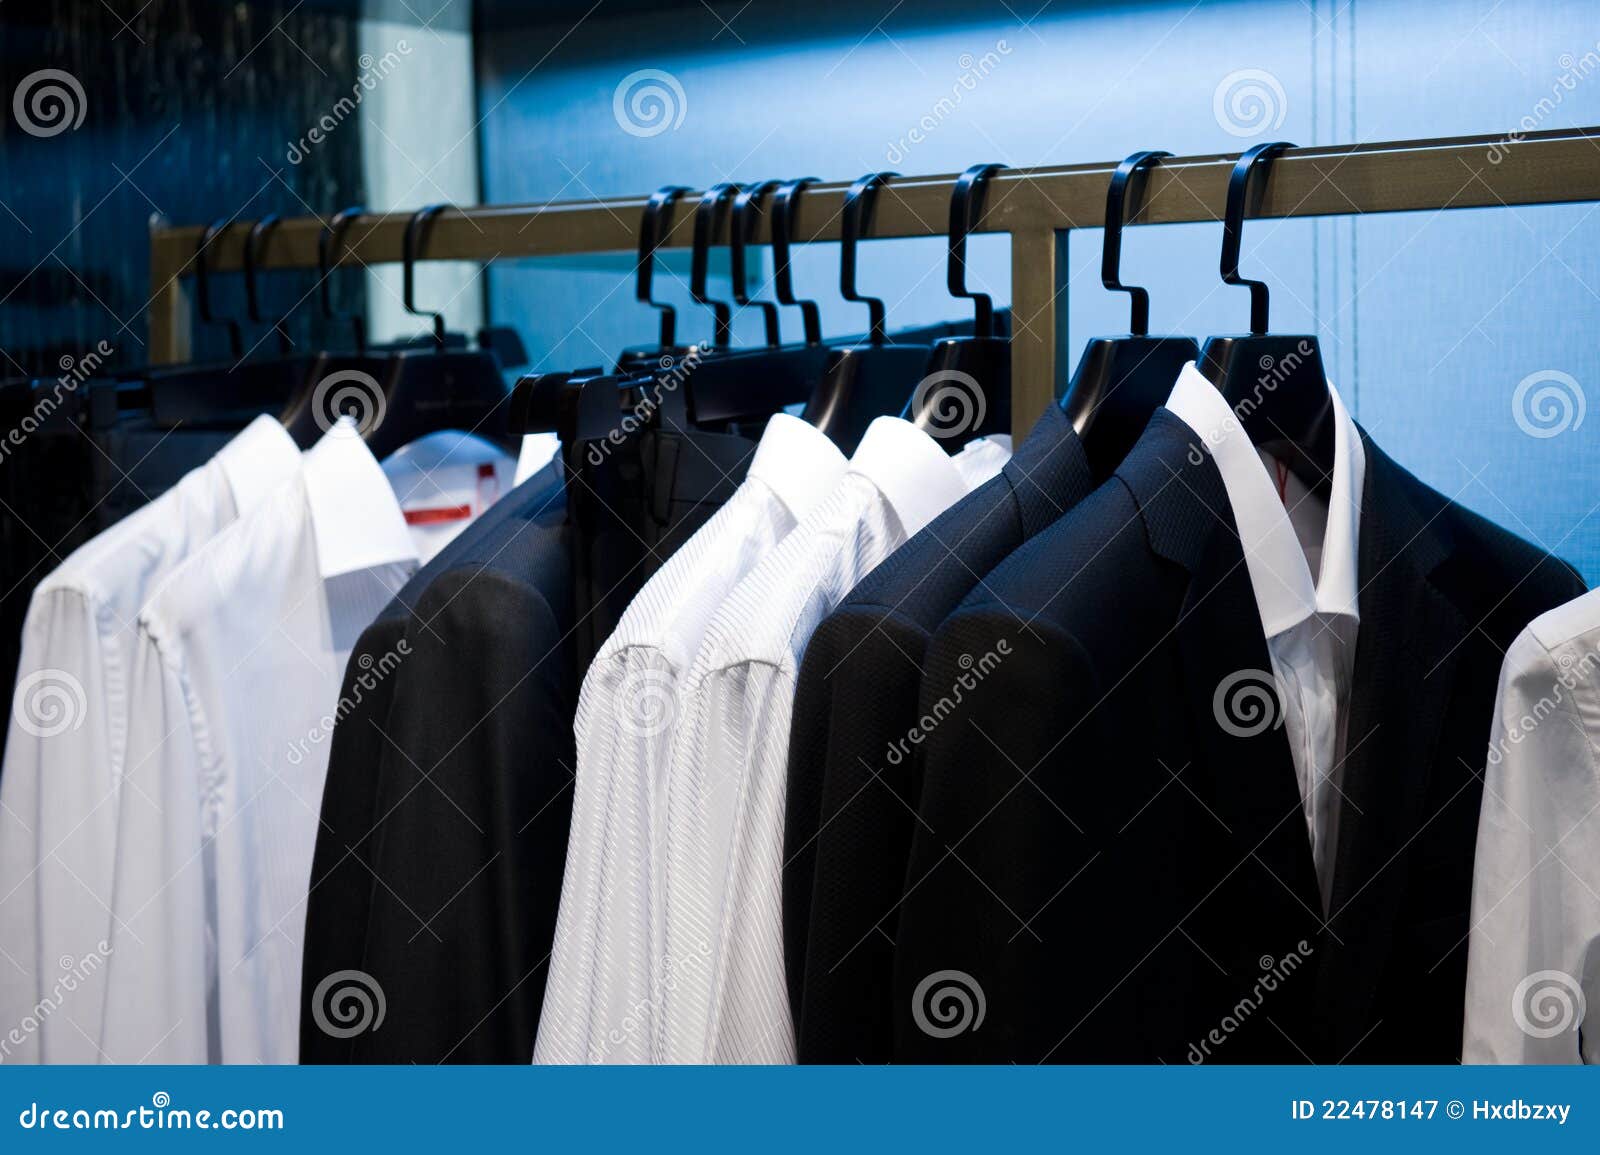 Suits stock image. Image of boutique, group, hang, male - 22478147